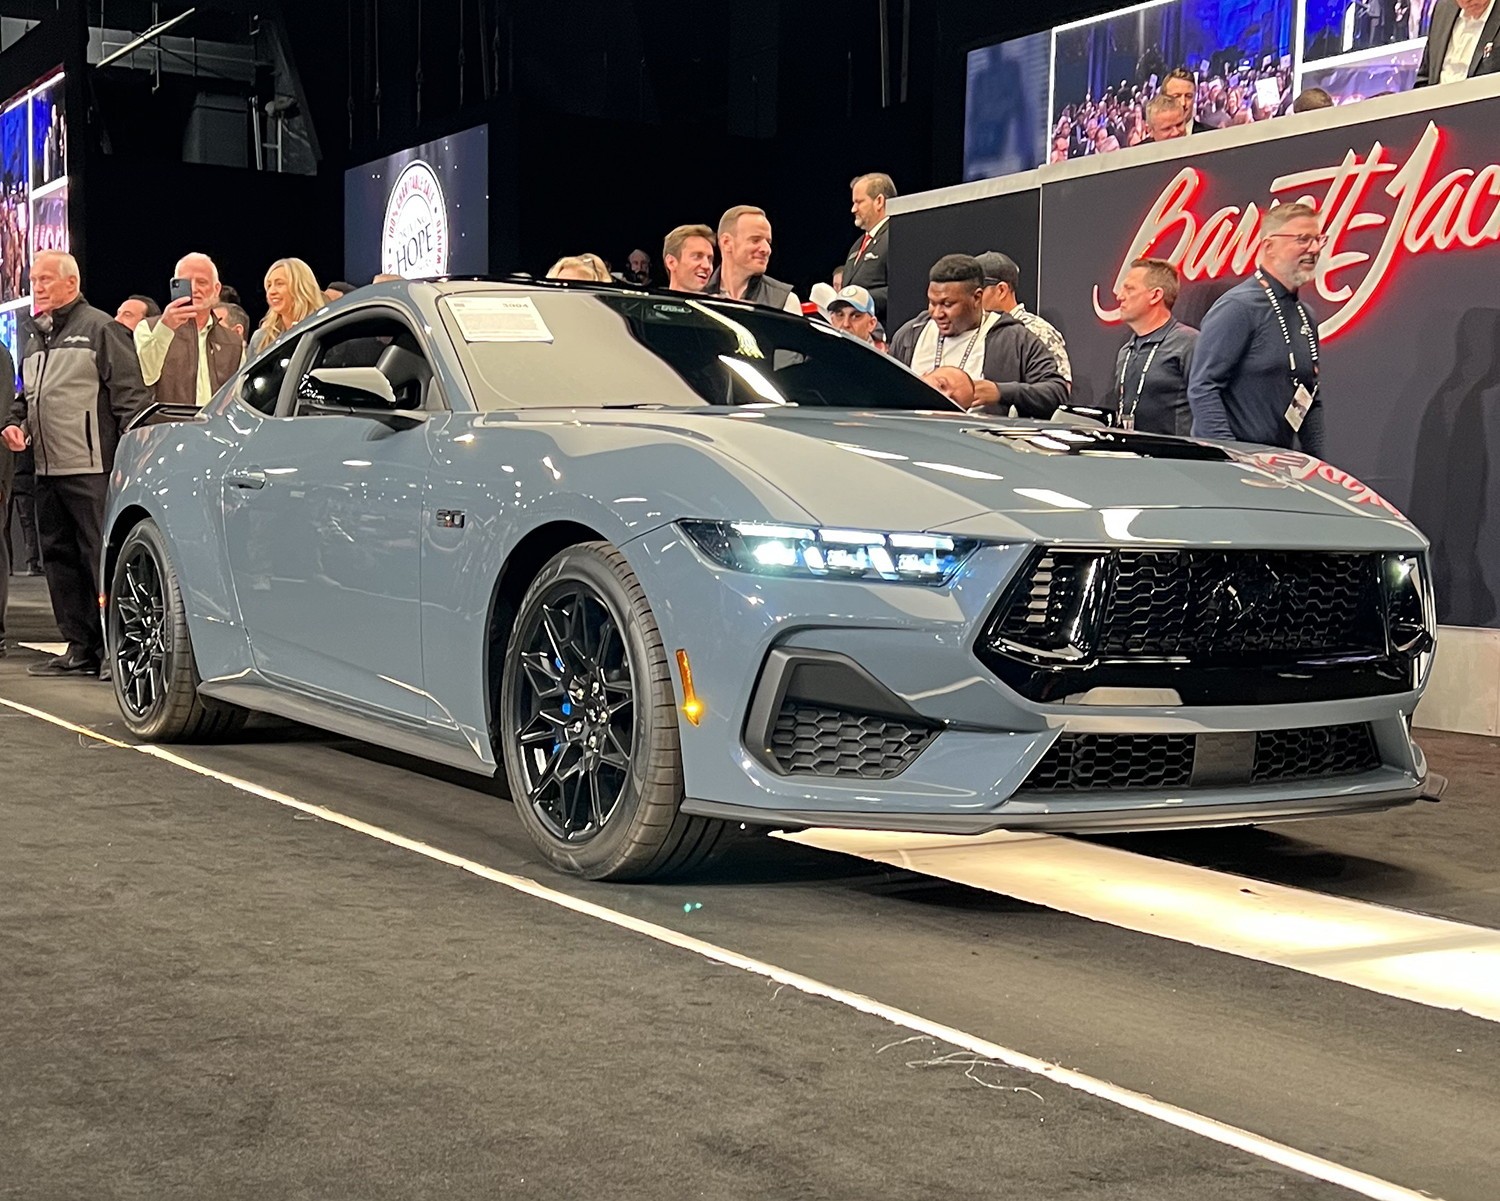 2024 Ford Mustang VIN 001 Just Sold for a Whopping 490,000 at Auction